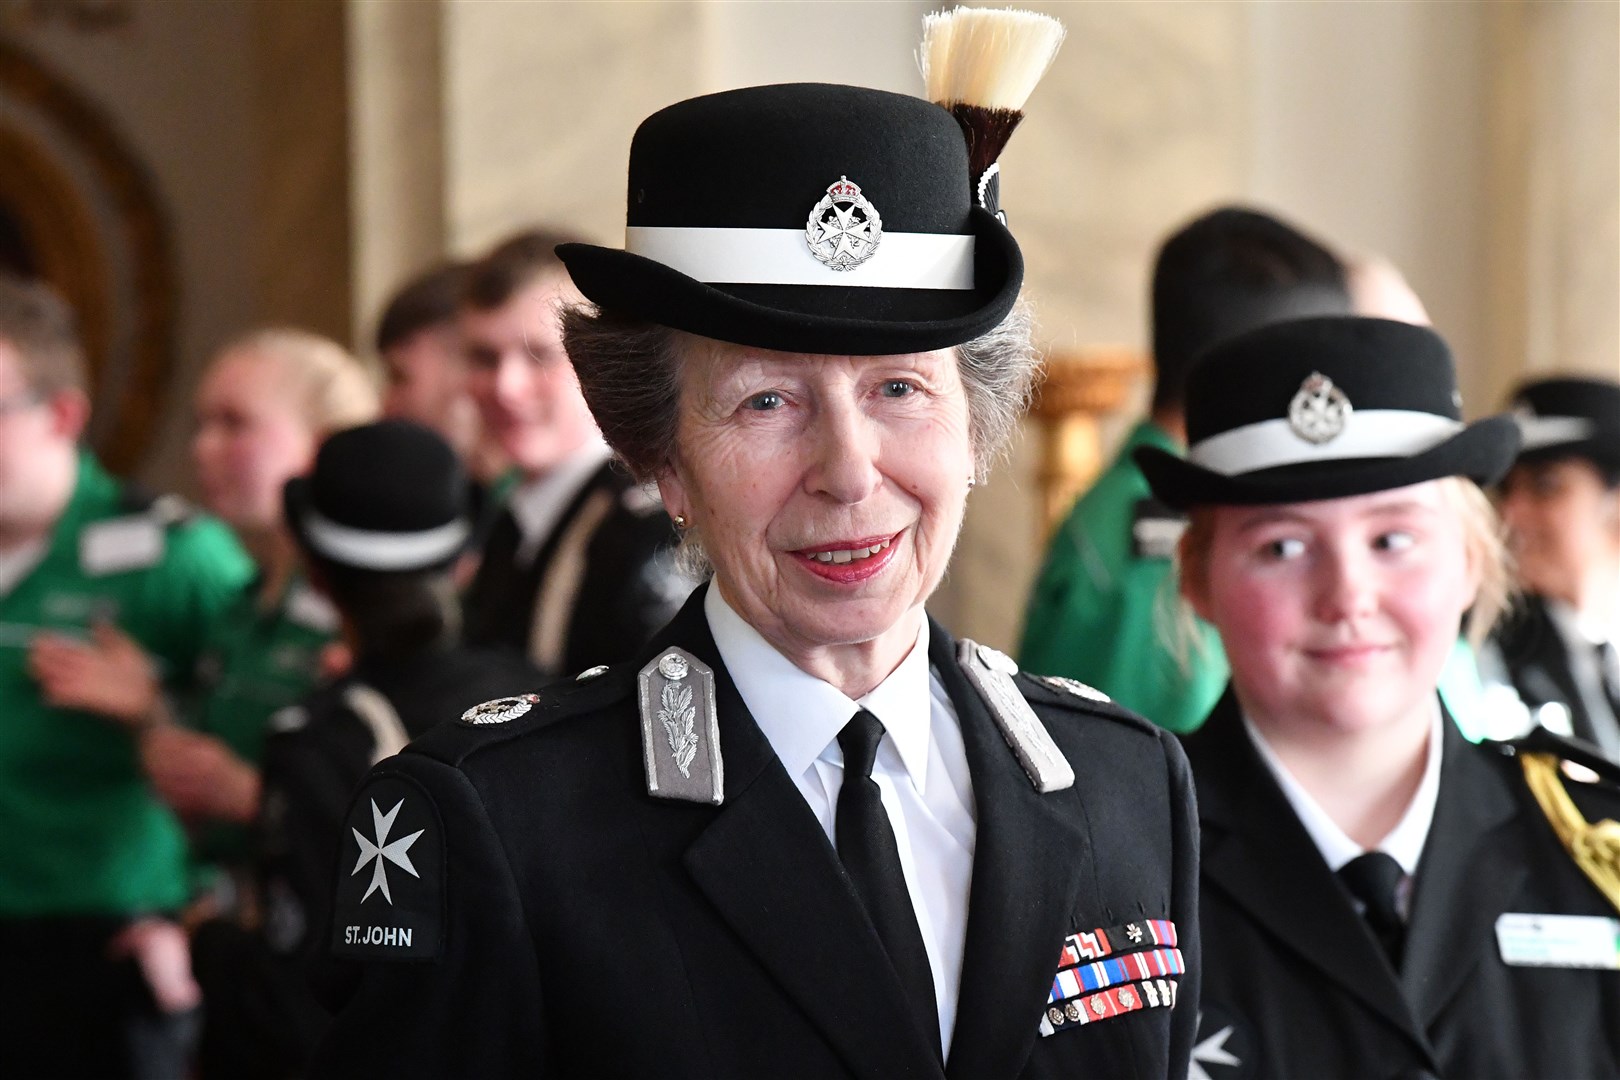 HRH Princess Royal meeting attendees at the ceremony (Theodore Wood Photography)